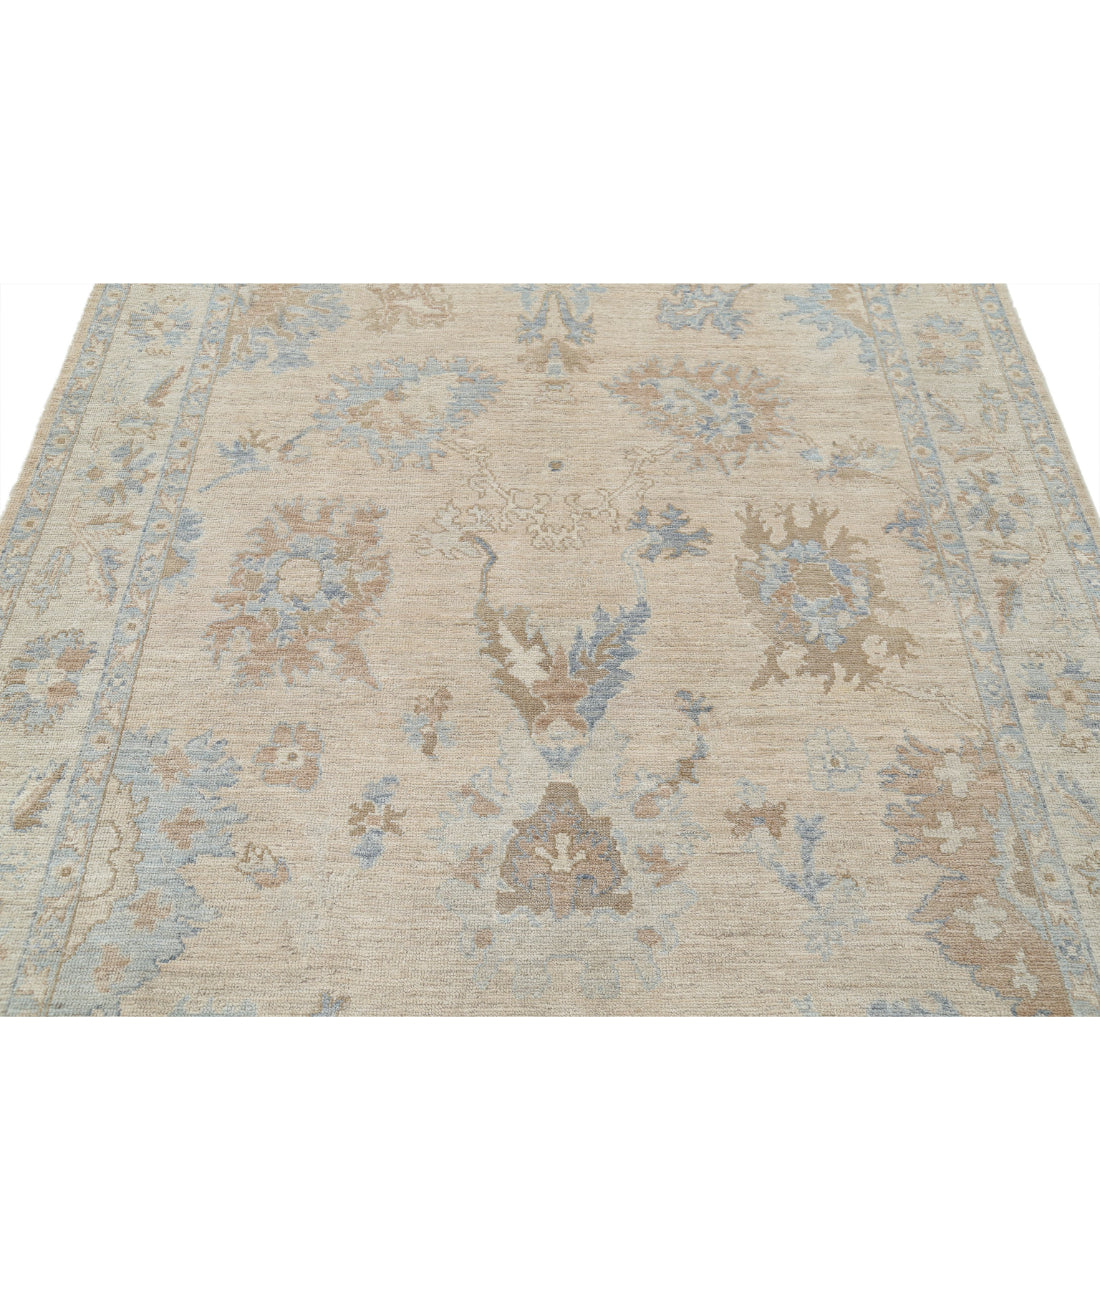 Hand Knotted Oushak Wool Rug - 5'9'' x 8'9'' 5'9'' x 8'9'' (173 X 263) / Taupe / Beige